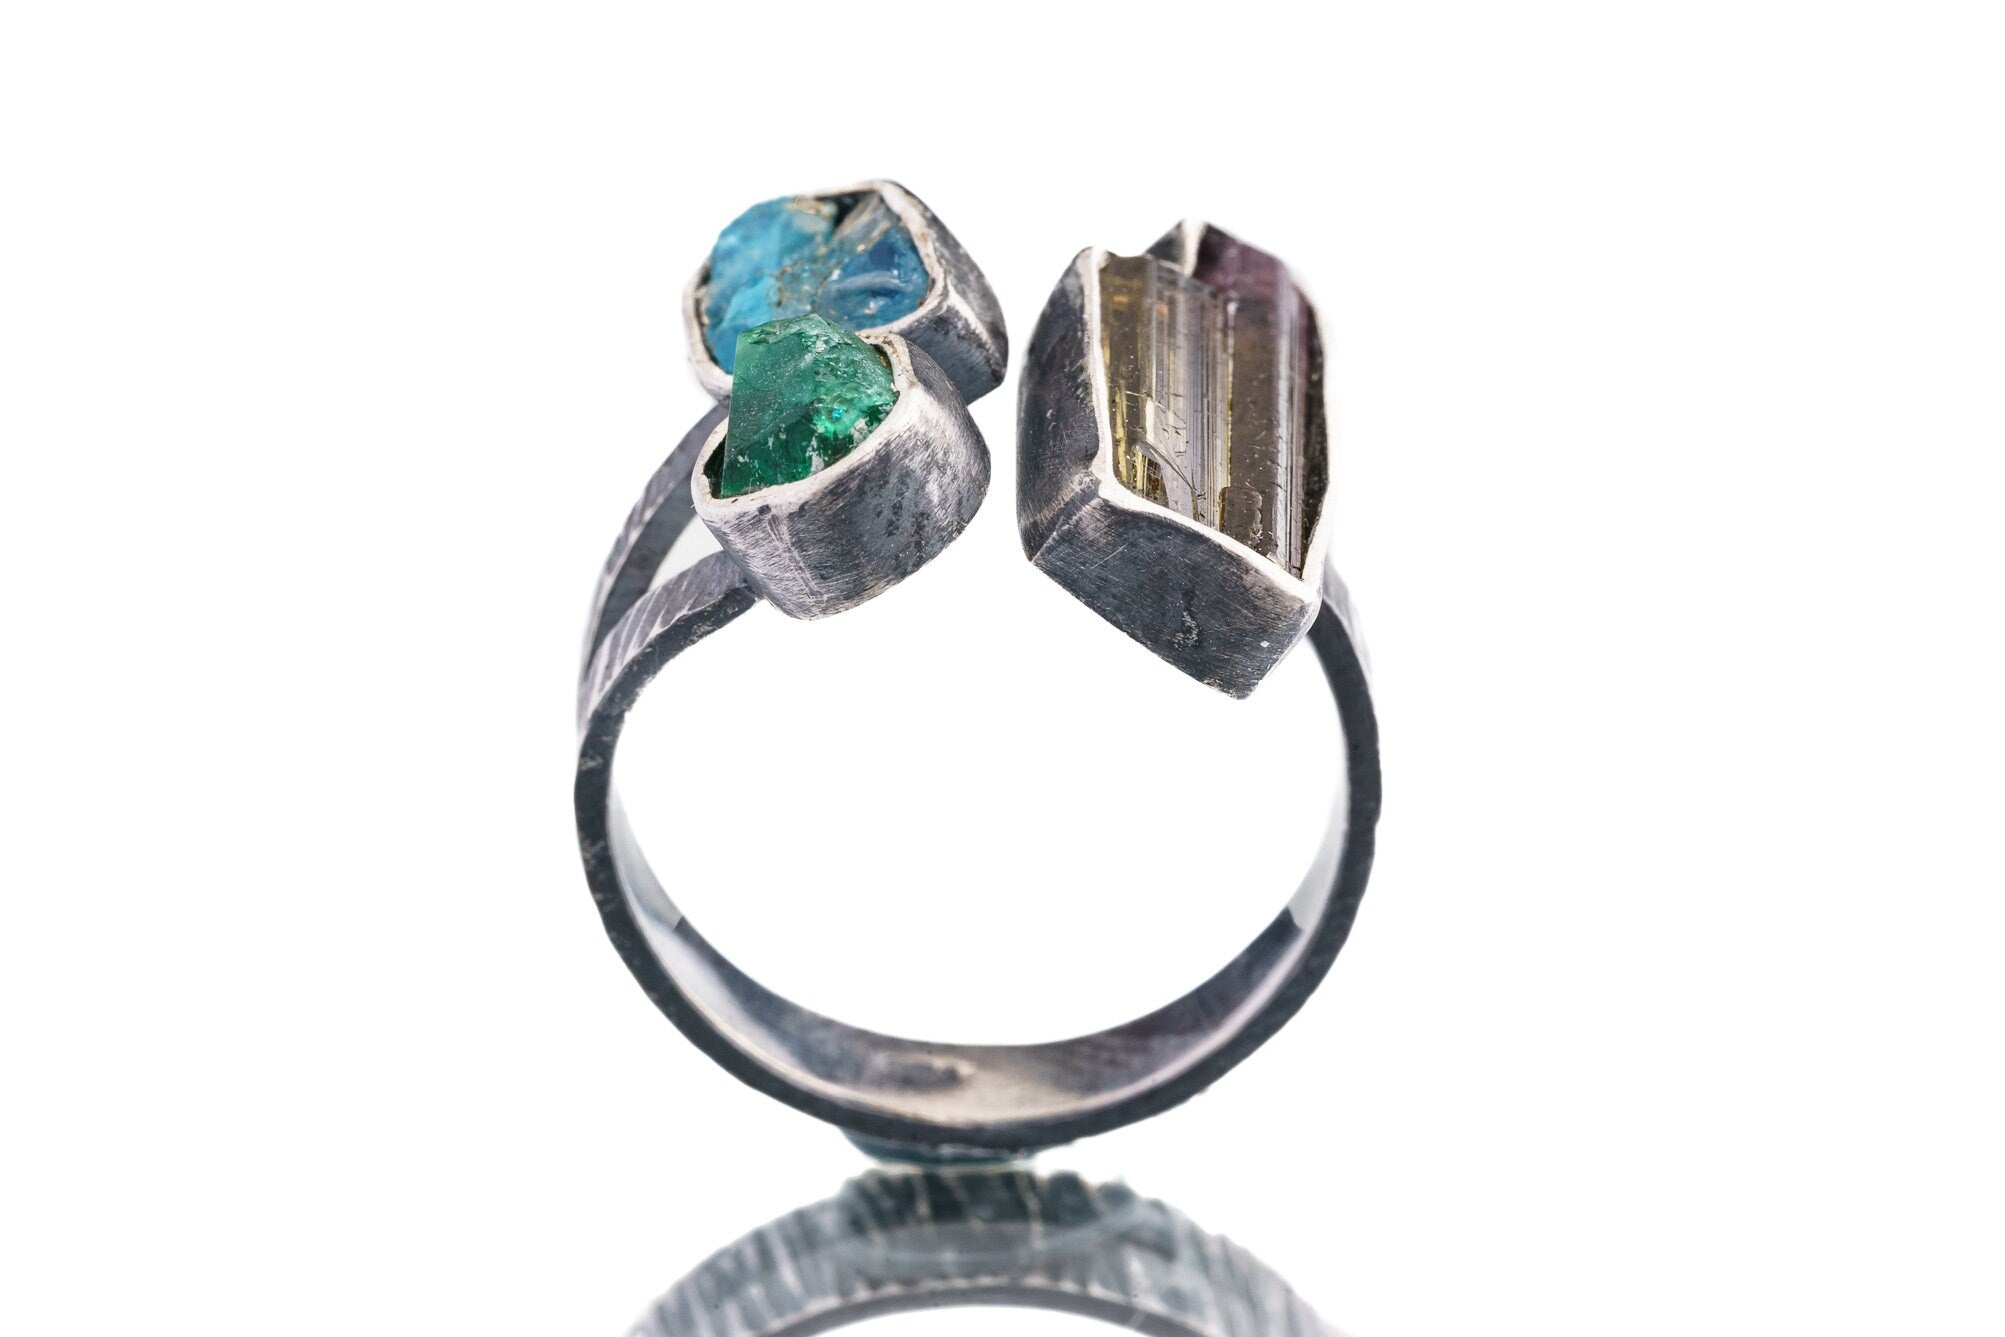 Smoky Quartz, Emerald & Apatite - 925 Sterling Silver - Multi Stone - Textured, Oxidised - Open Ring Band - Adjustable US 6 - 10 - NO/15